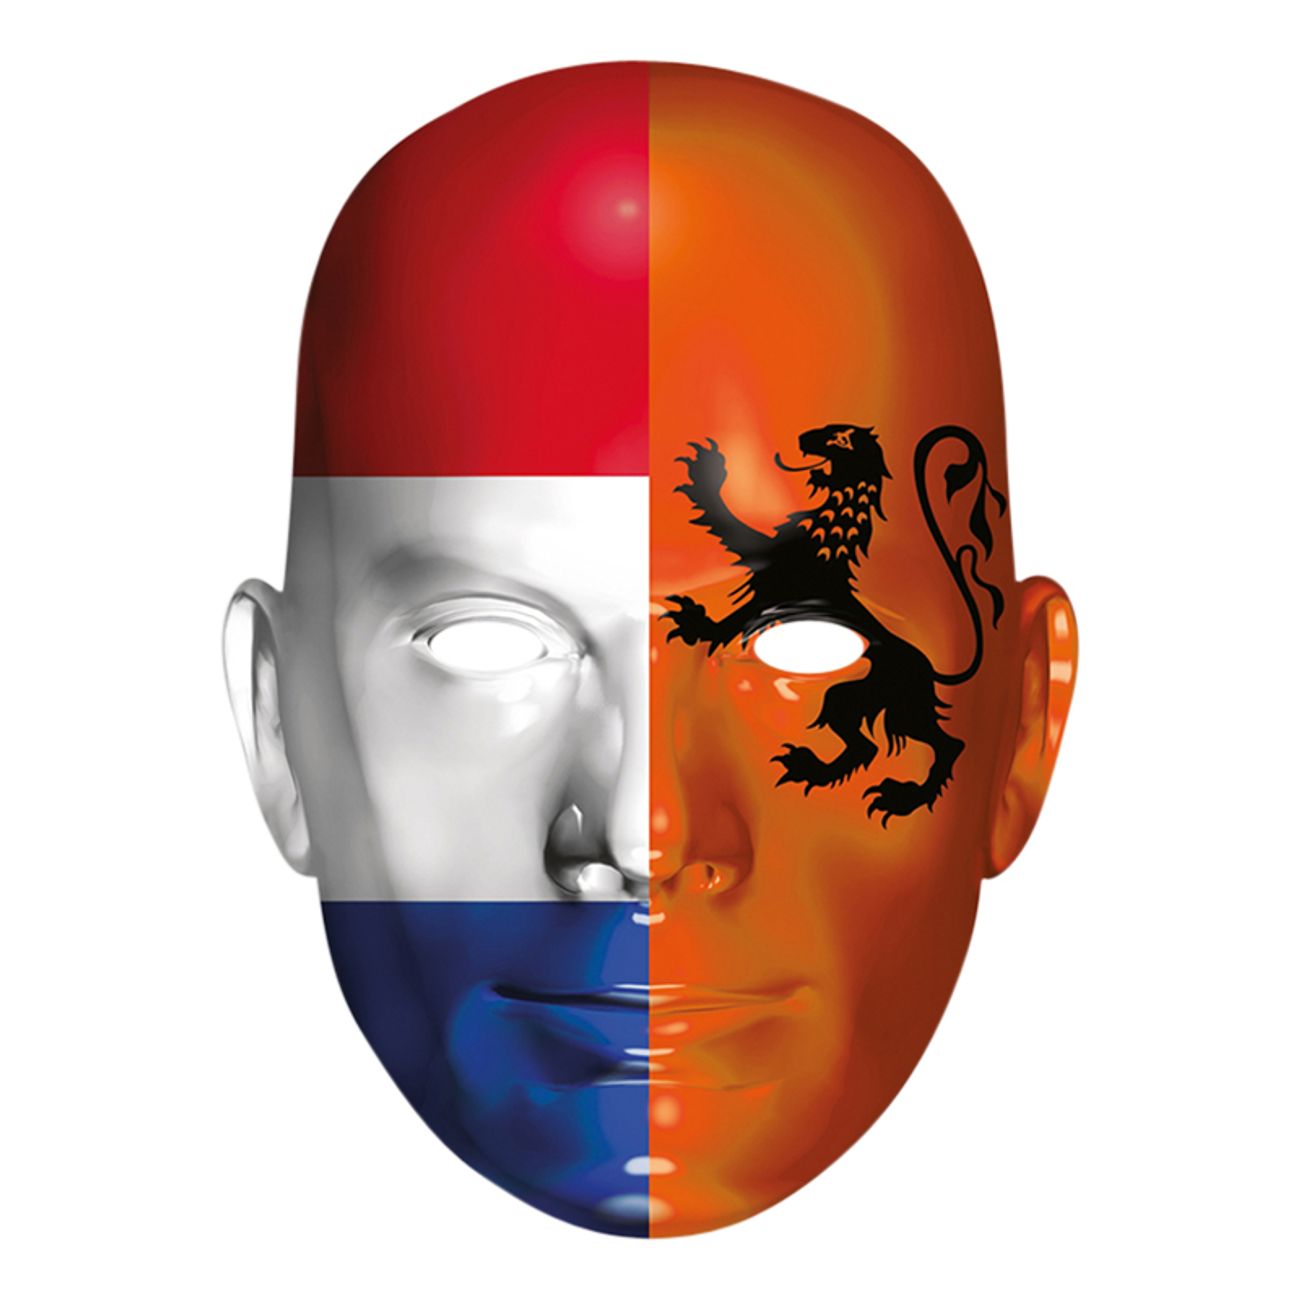 hollands-flagga-pappmask-3